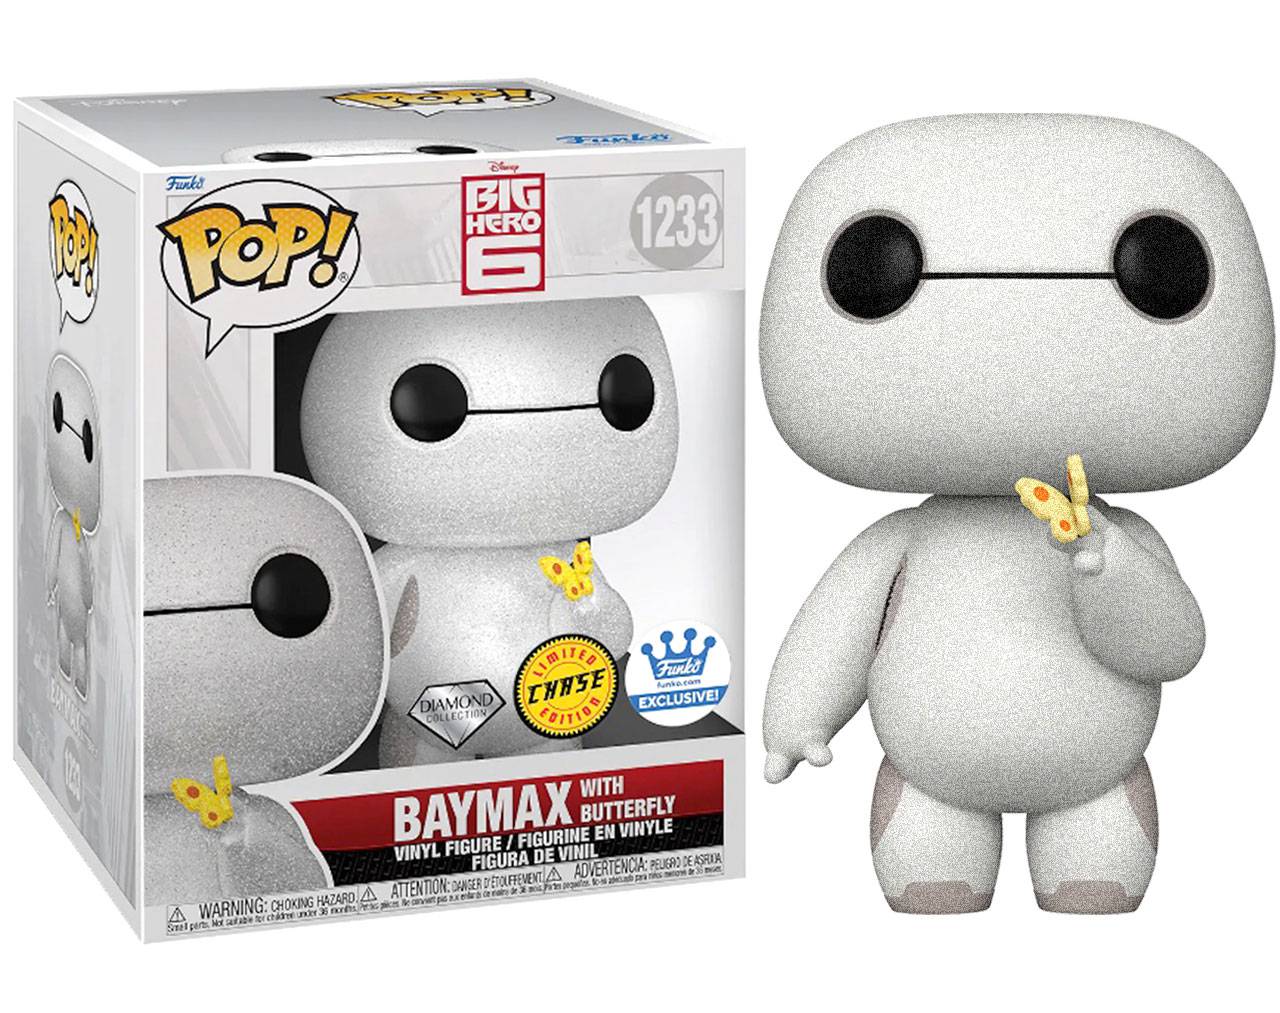 Baymax with Butterfly Chase Edition (Funko-Shop Exclusive) - Big Hero 6 Pop! Vinyl